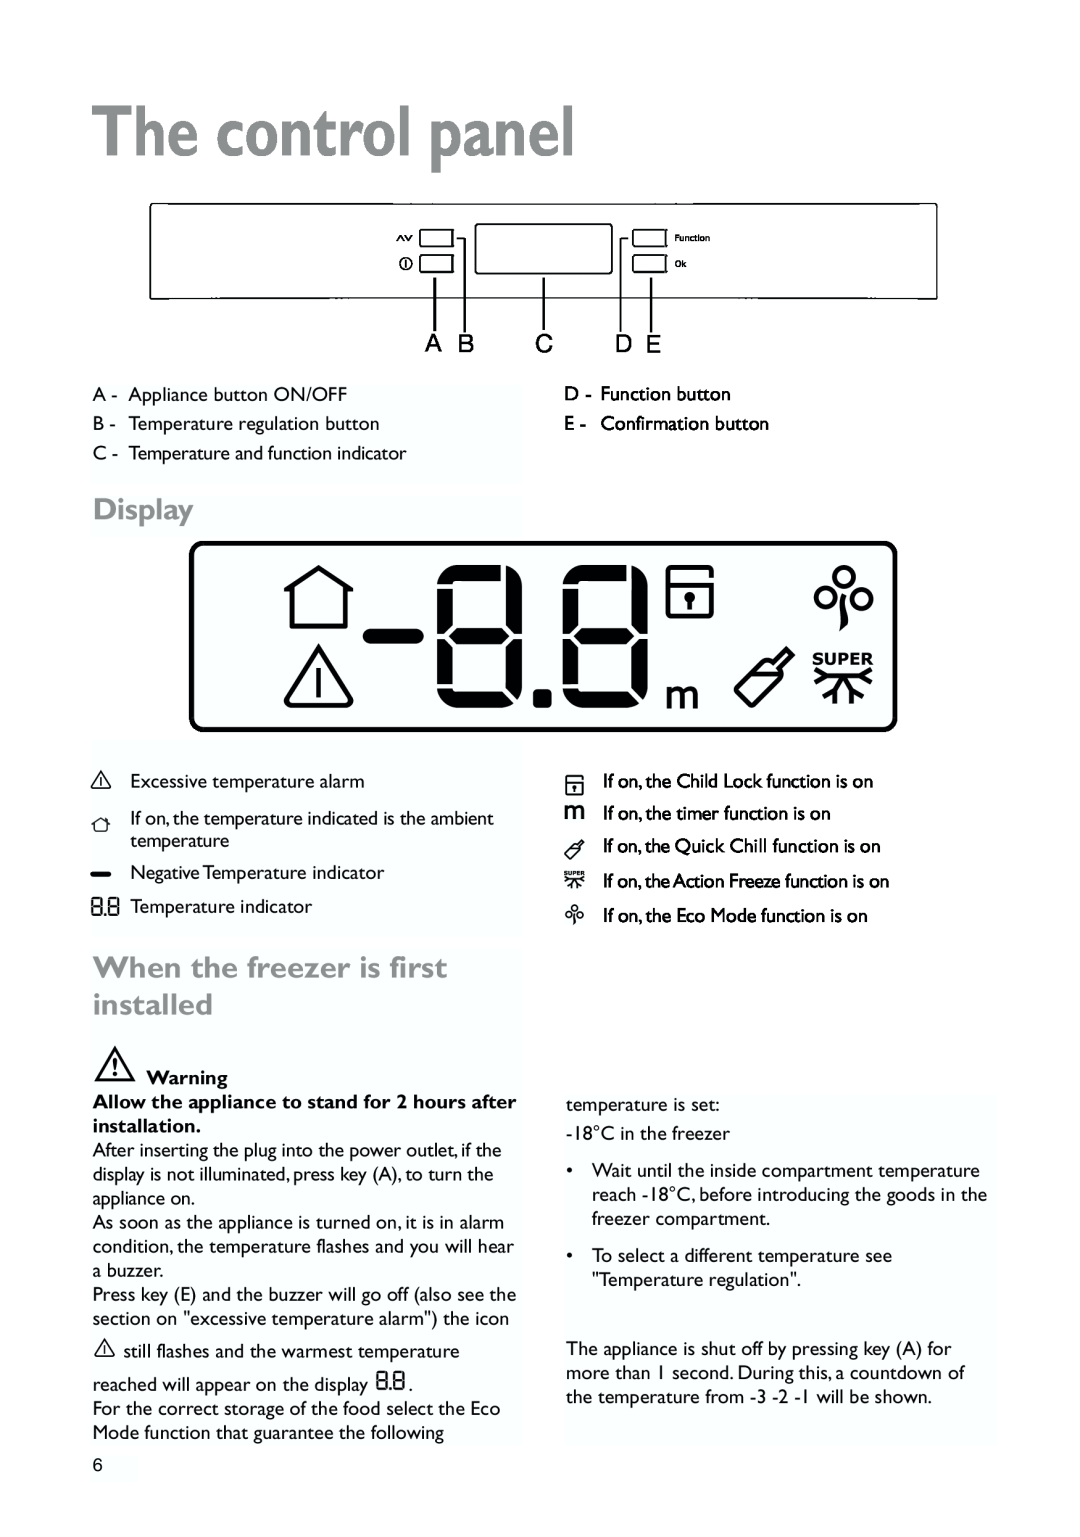 John Lewis JLFZW1810 instruction manual The control panel, Display, When the freezer is first installed 